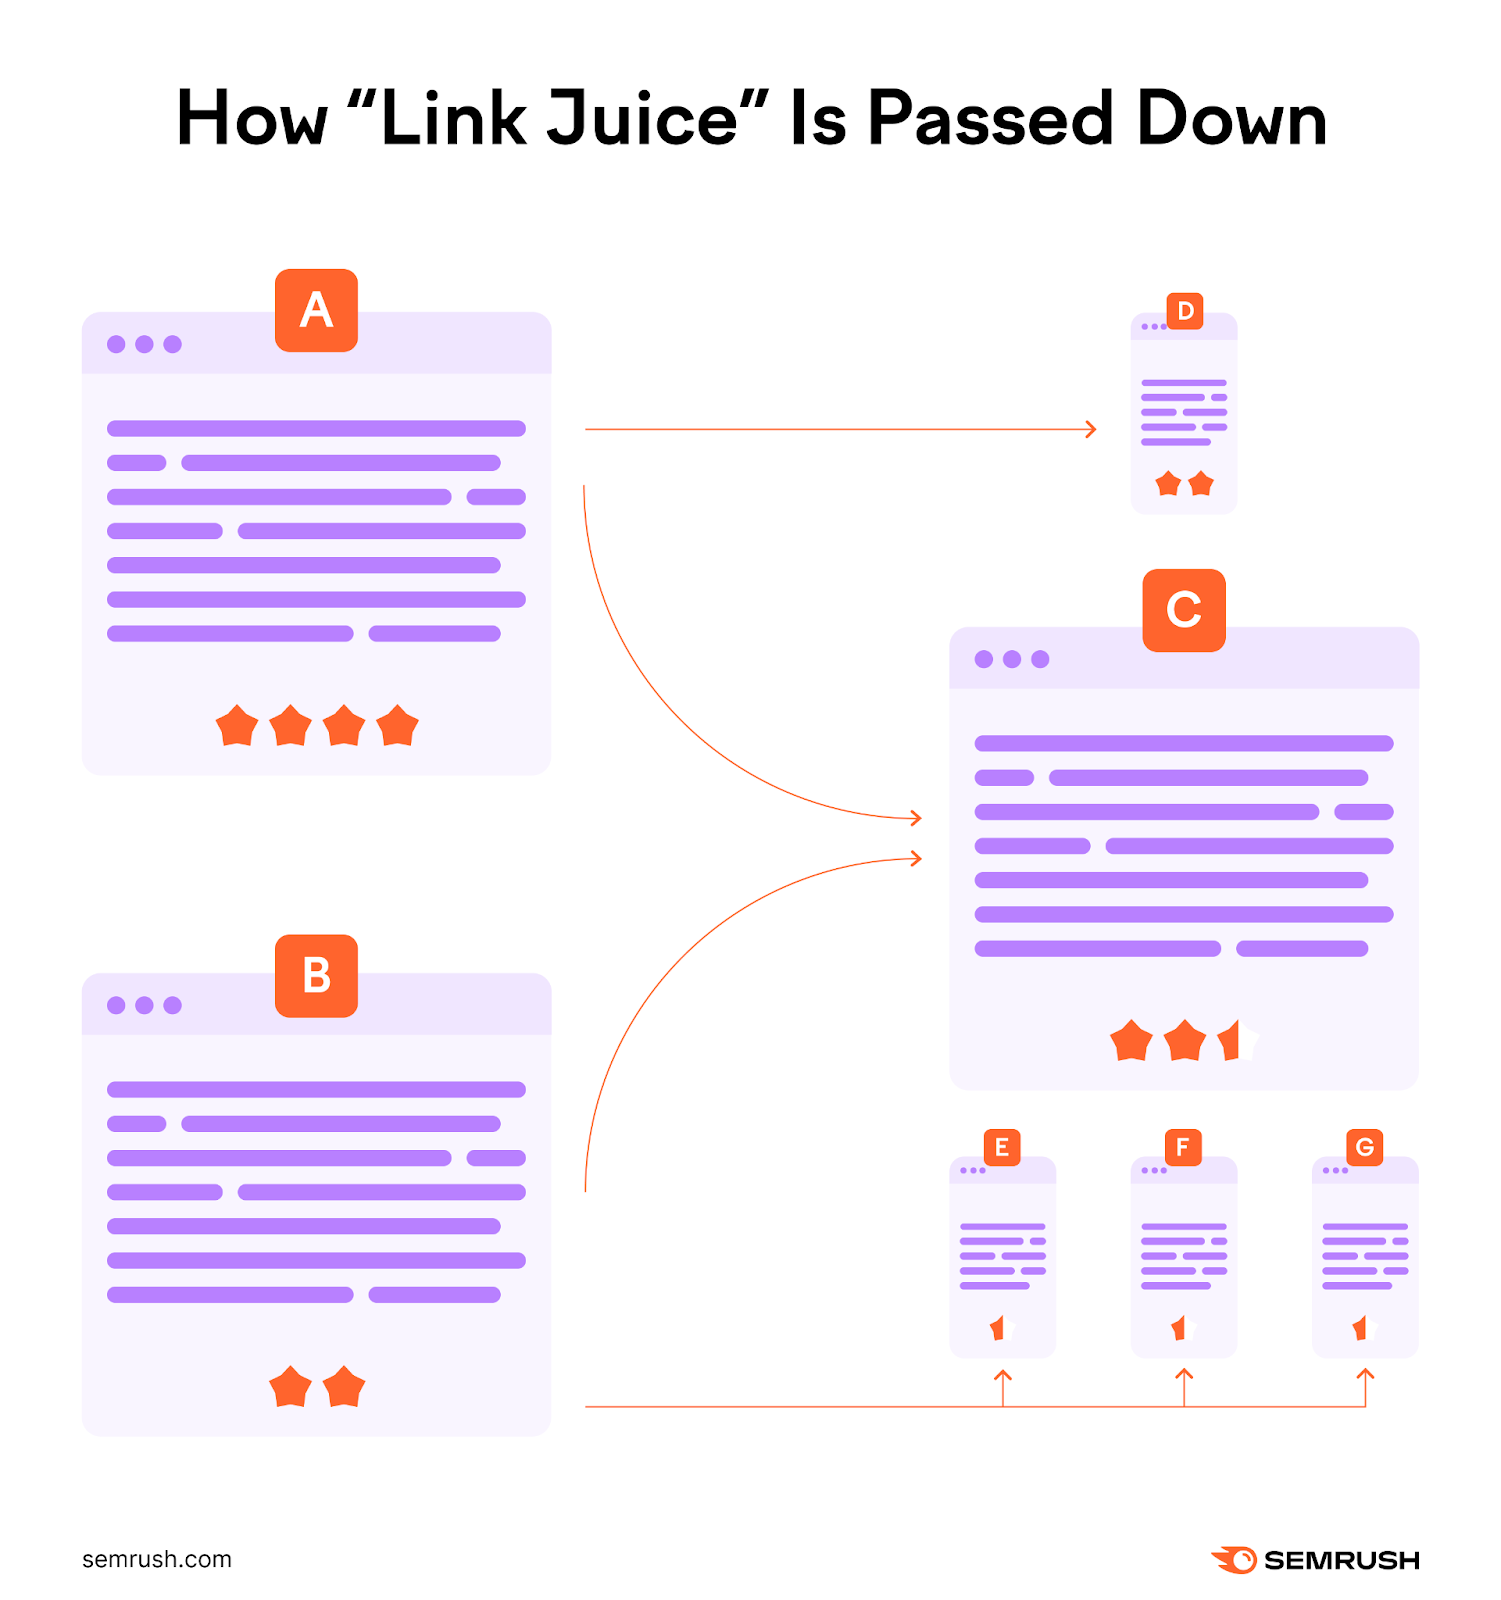 An infographic showing how "link juice" is passed down